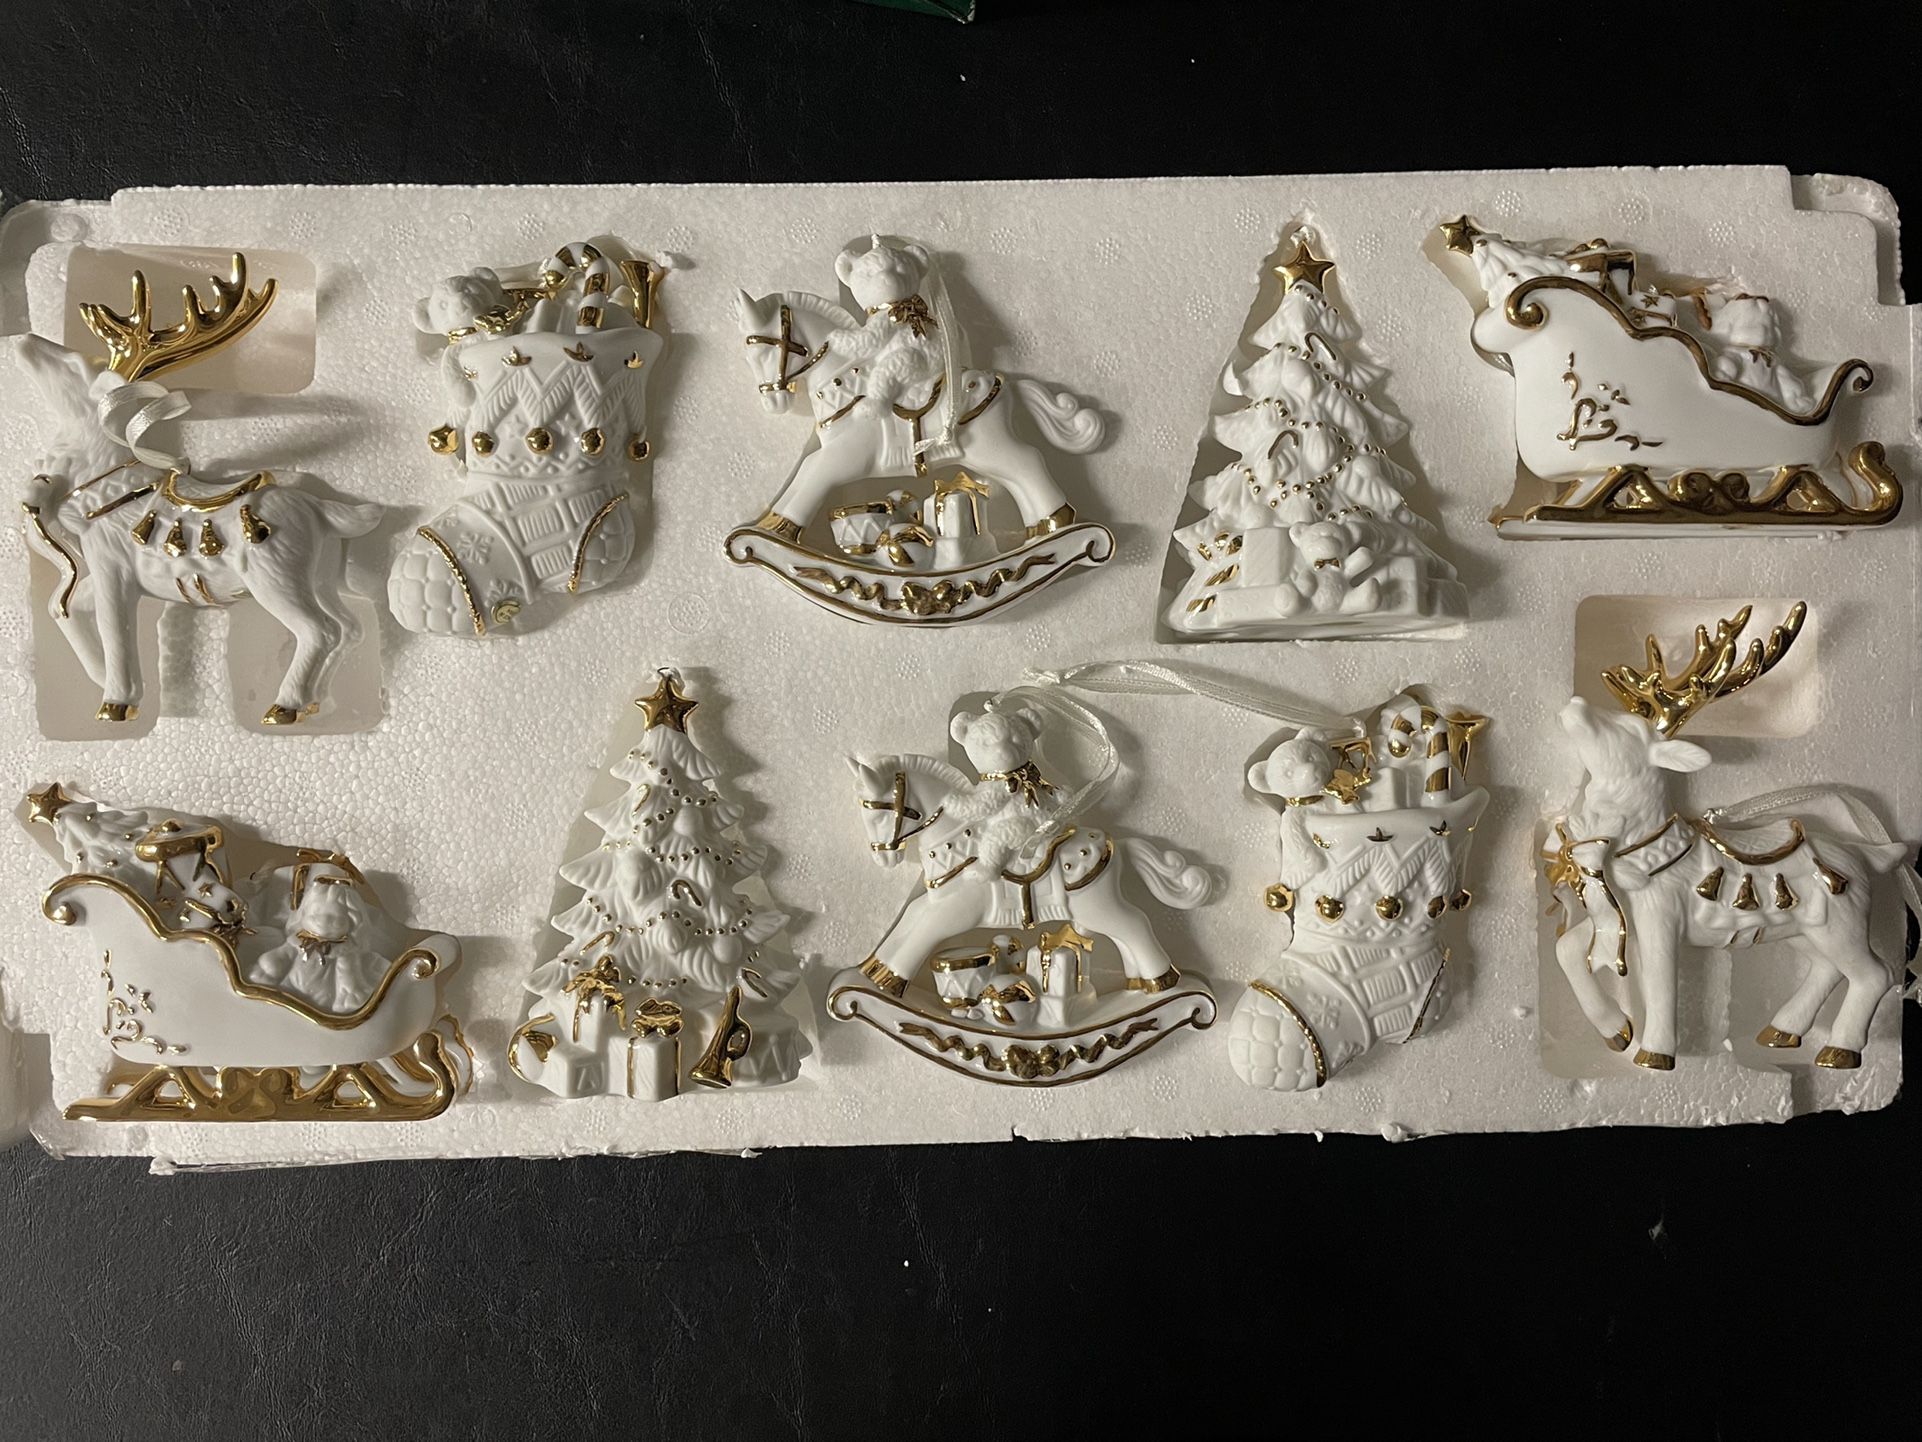 Traditions Hand painted Porcelain Ornaments set (10)